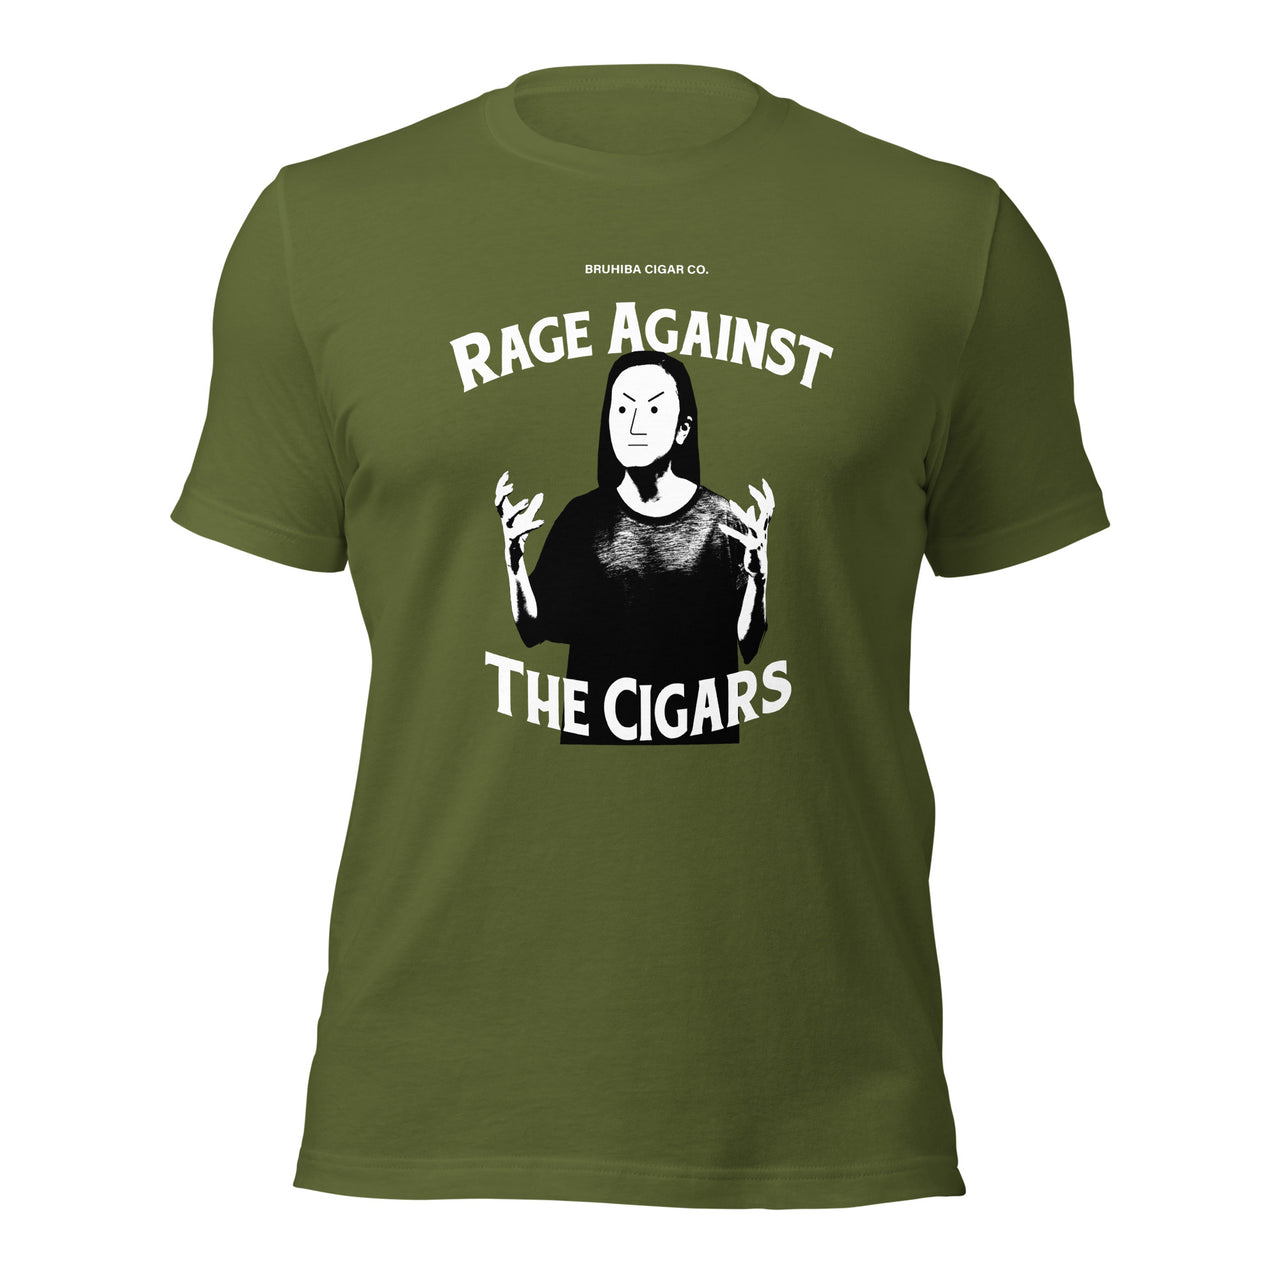 BRUHIBA "Rage Against the Cigars" Exclusive T-Shirt